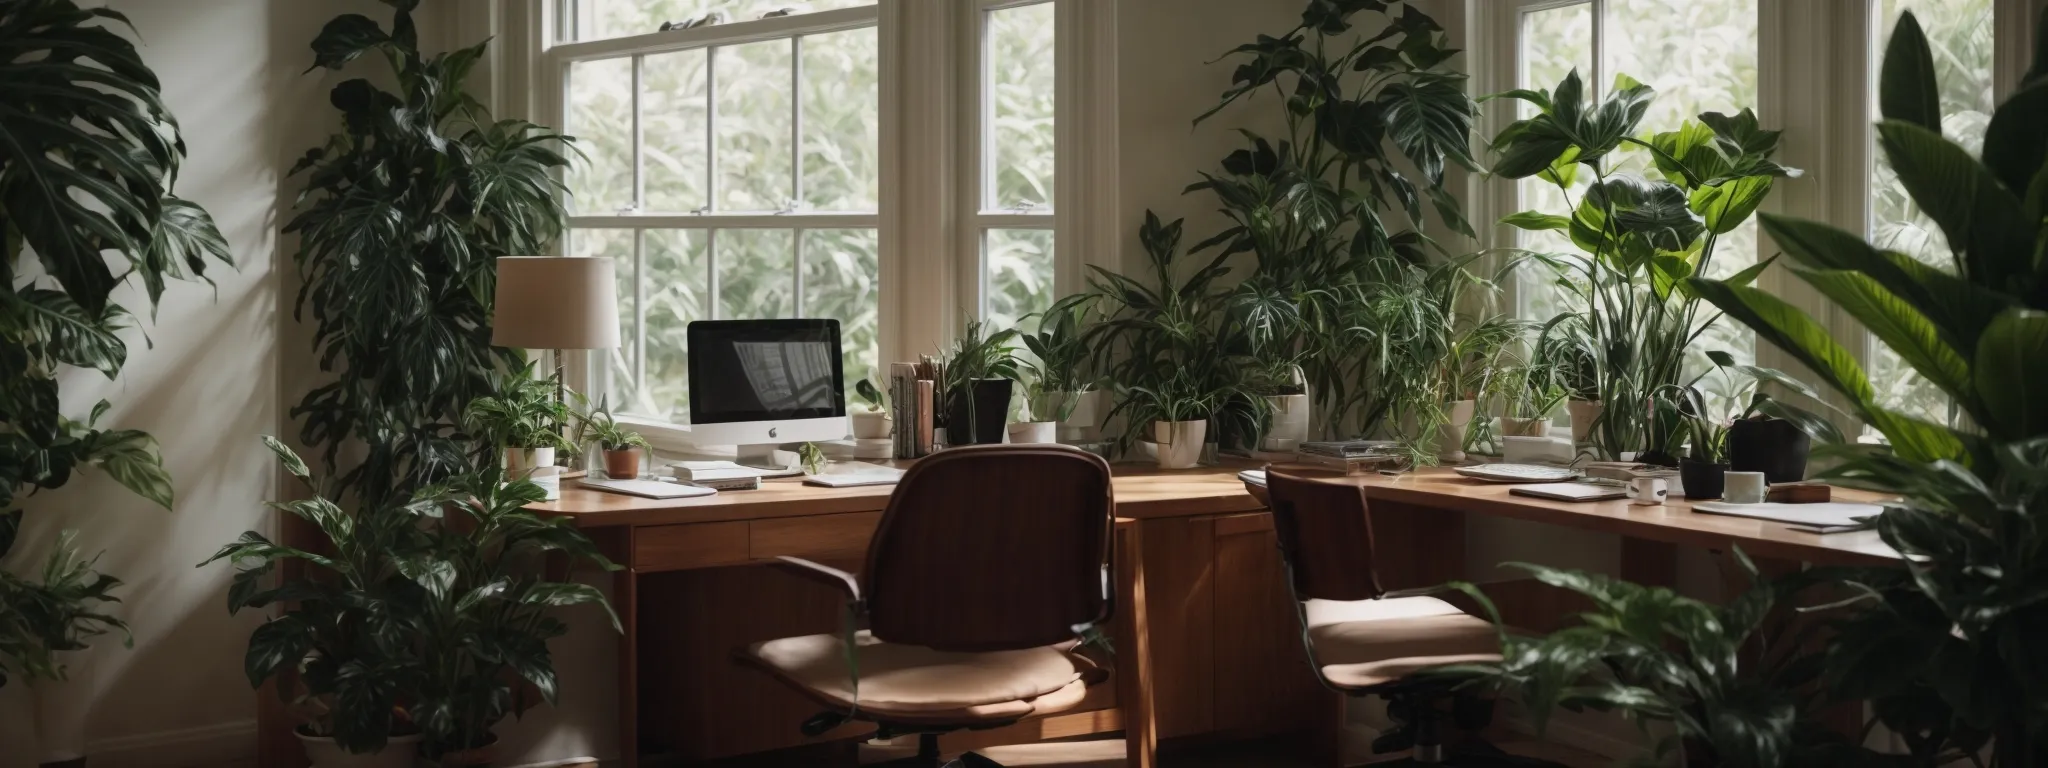 a serene home office with a comfortable chair, a laptop open to a word processing document, surrounded by peaceful indoor plants and soft lighting, embodying a productive yet calm environment for creating empathetic mental health content.